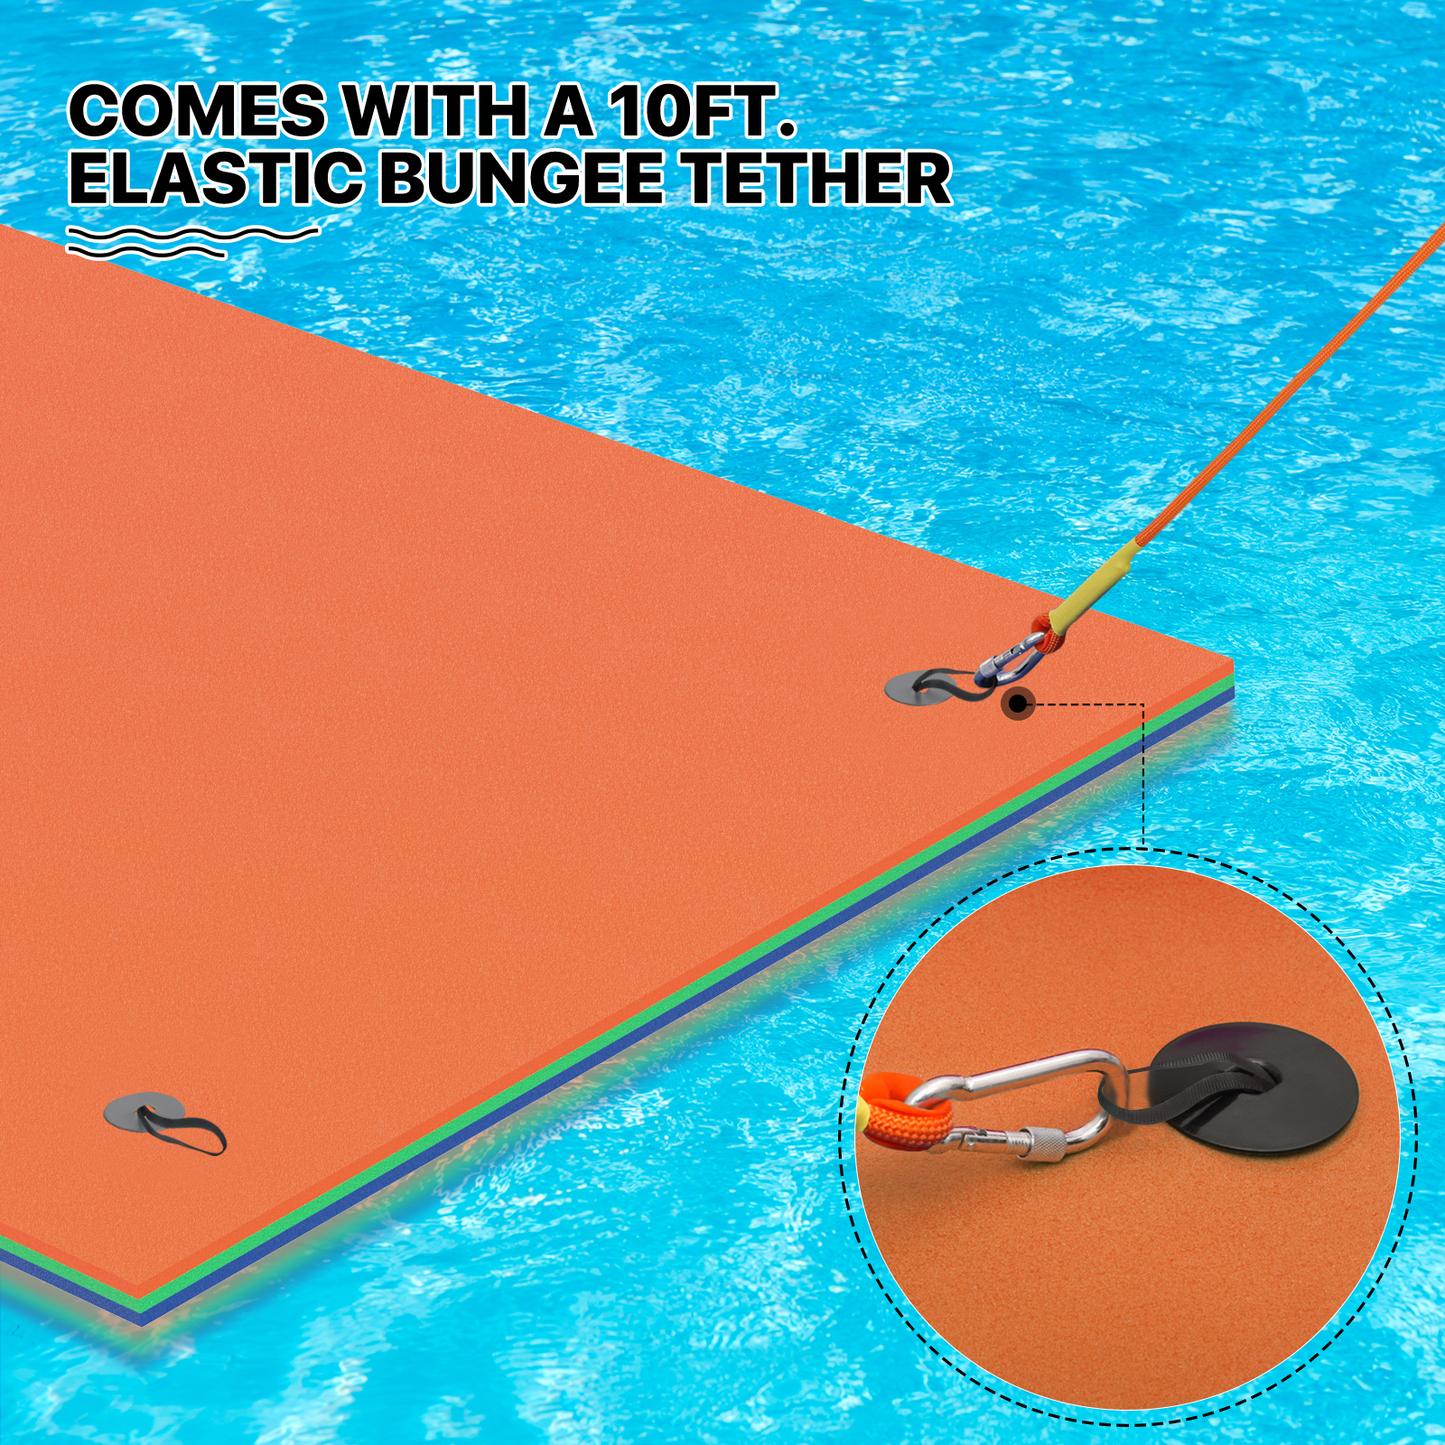 7 * 6 ft Water Floating Mat